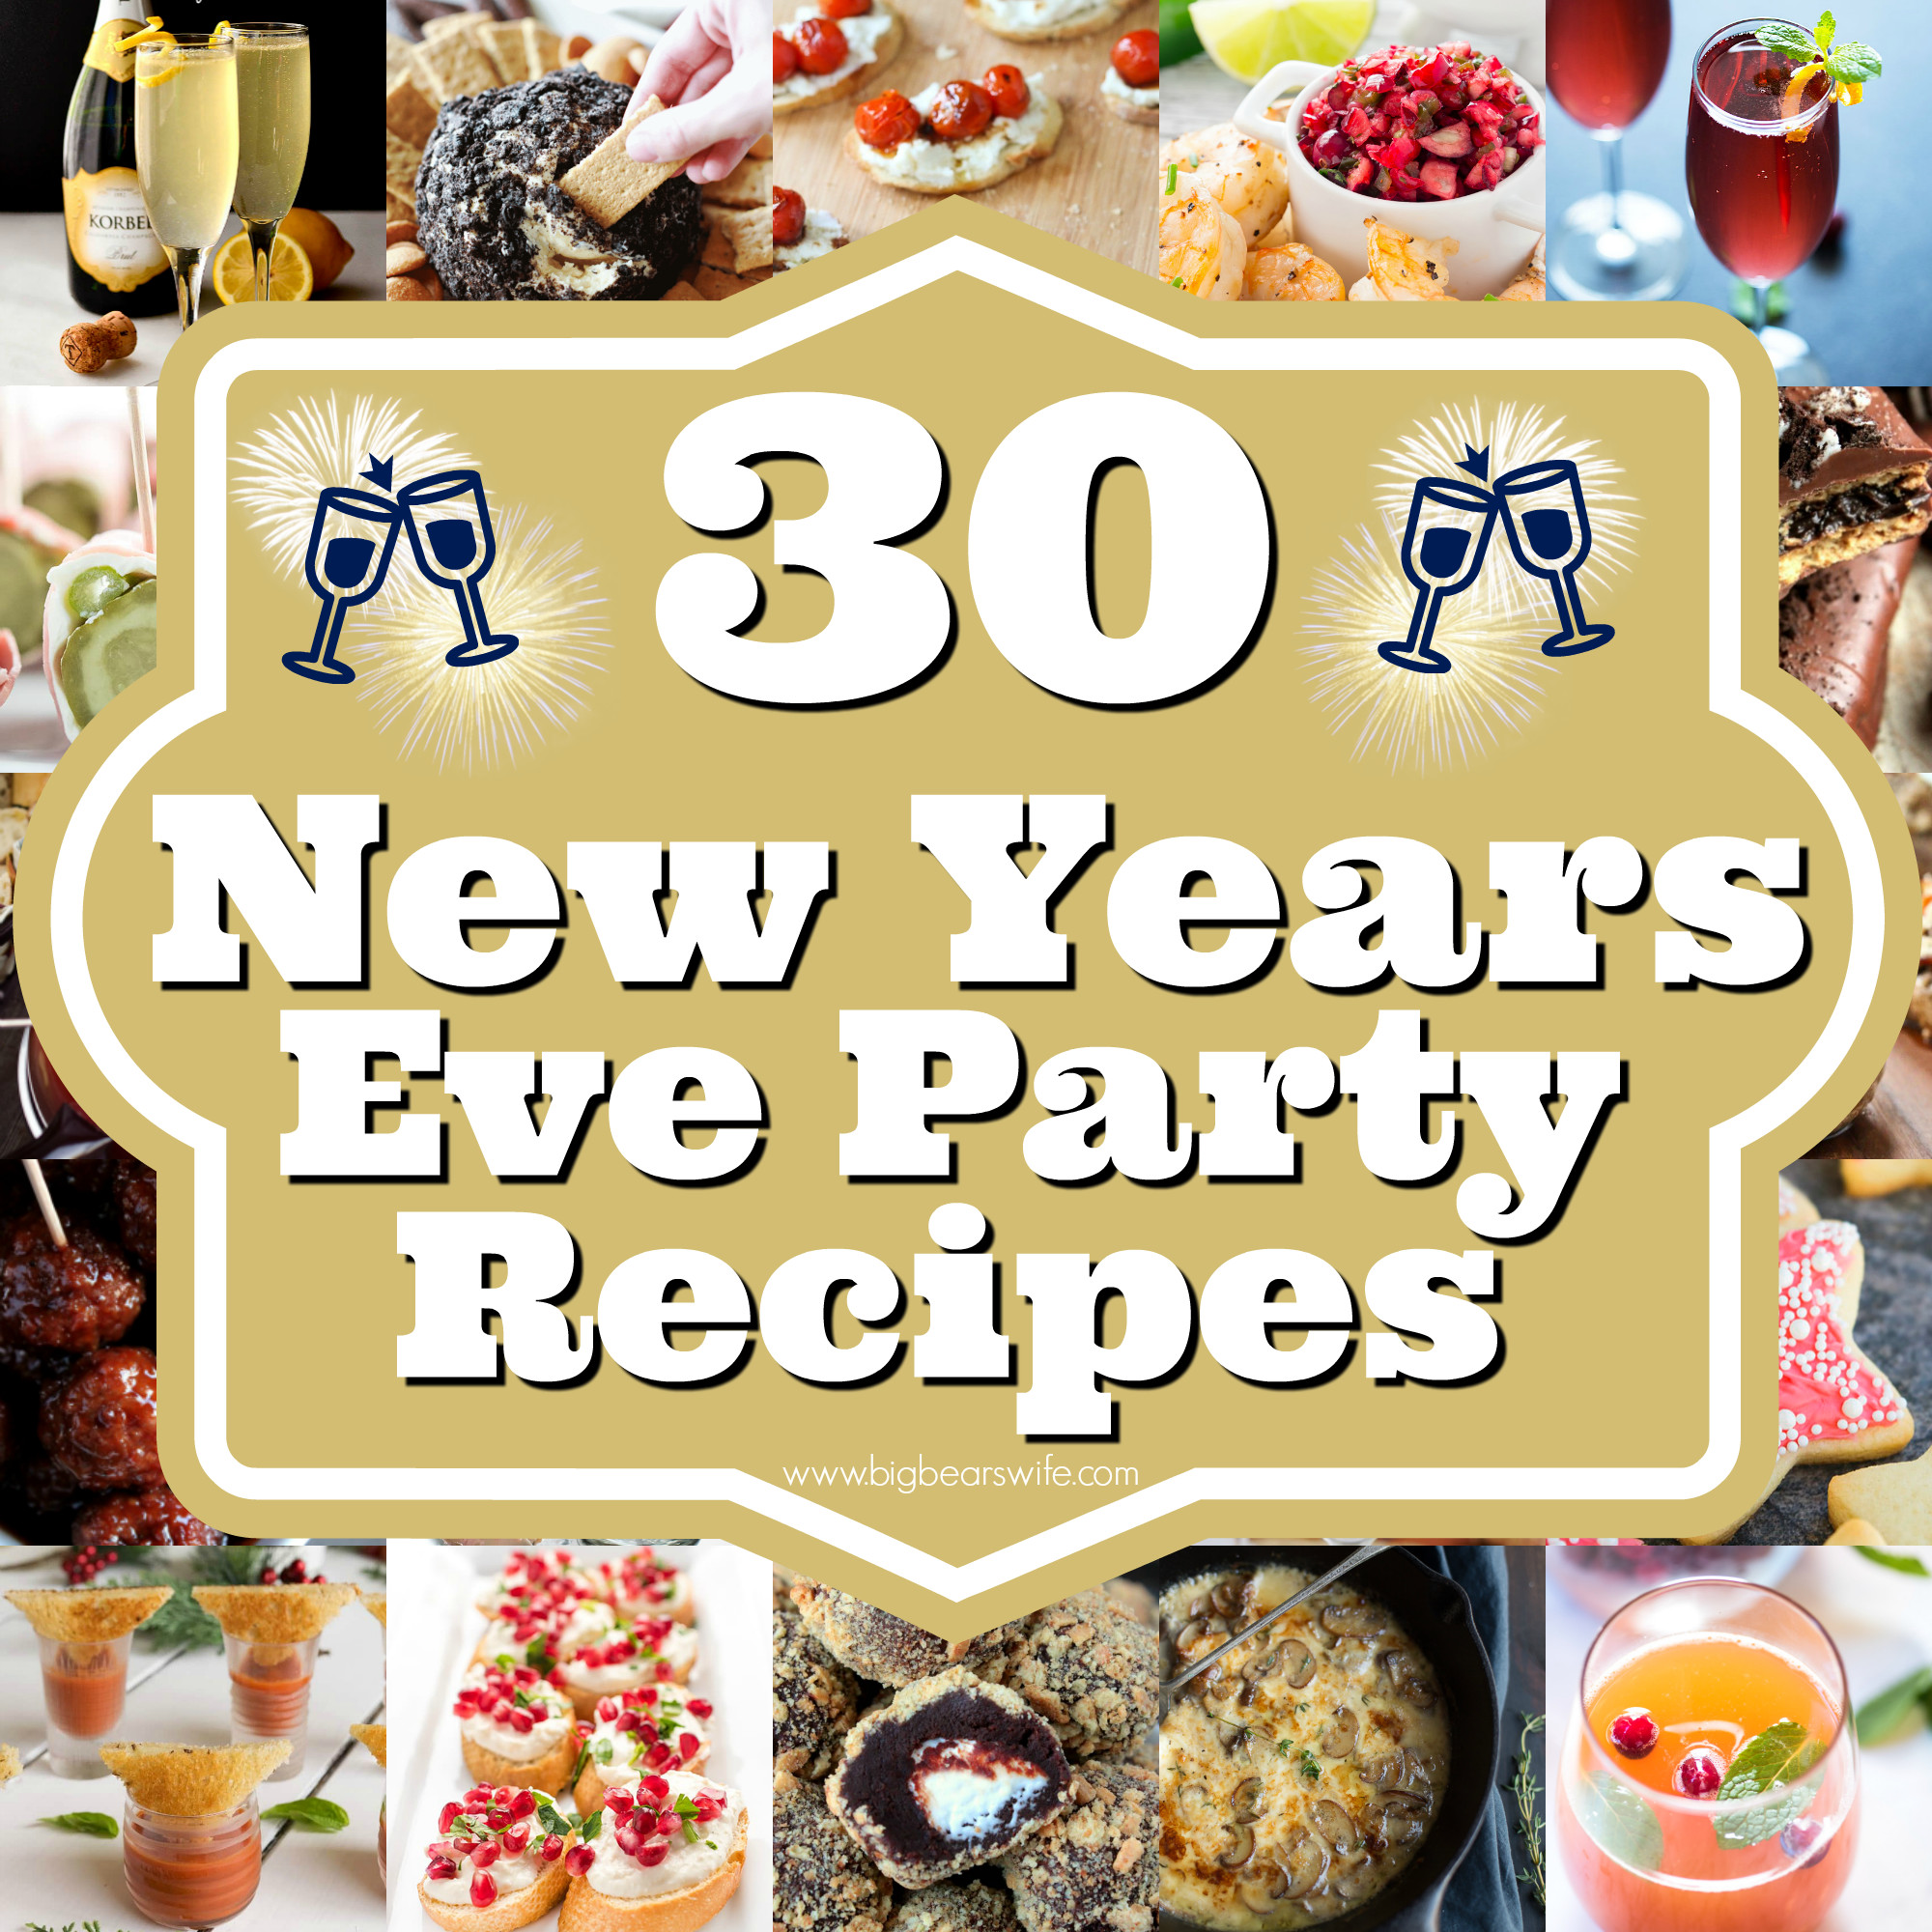 New Years Eve Party Food Ideas
 30 New Years Eve Party Recipes Savory Ideas Sweets and